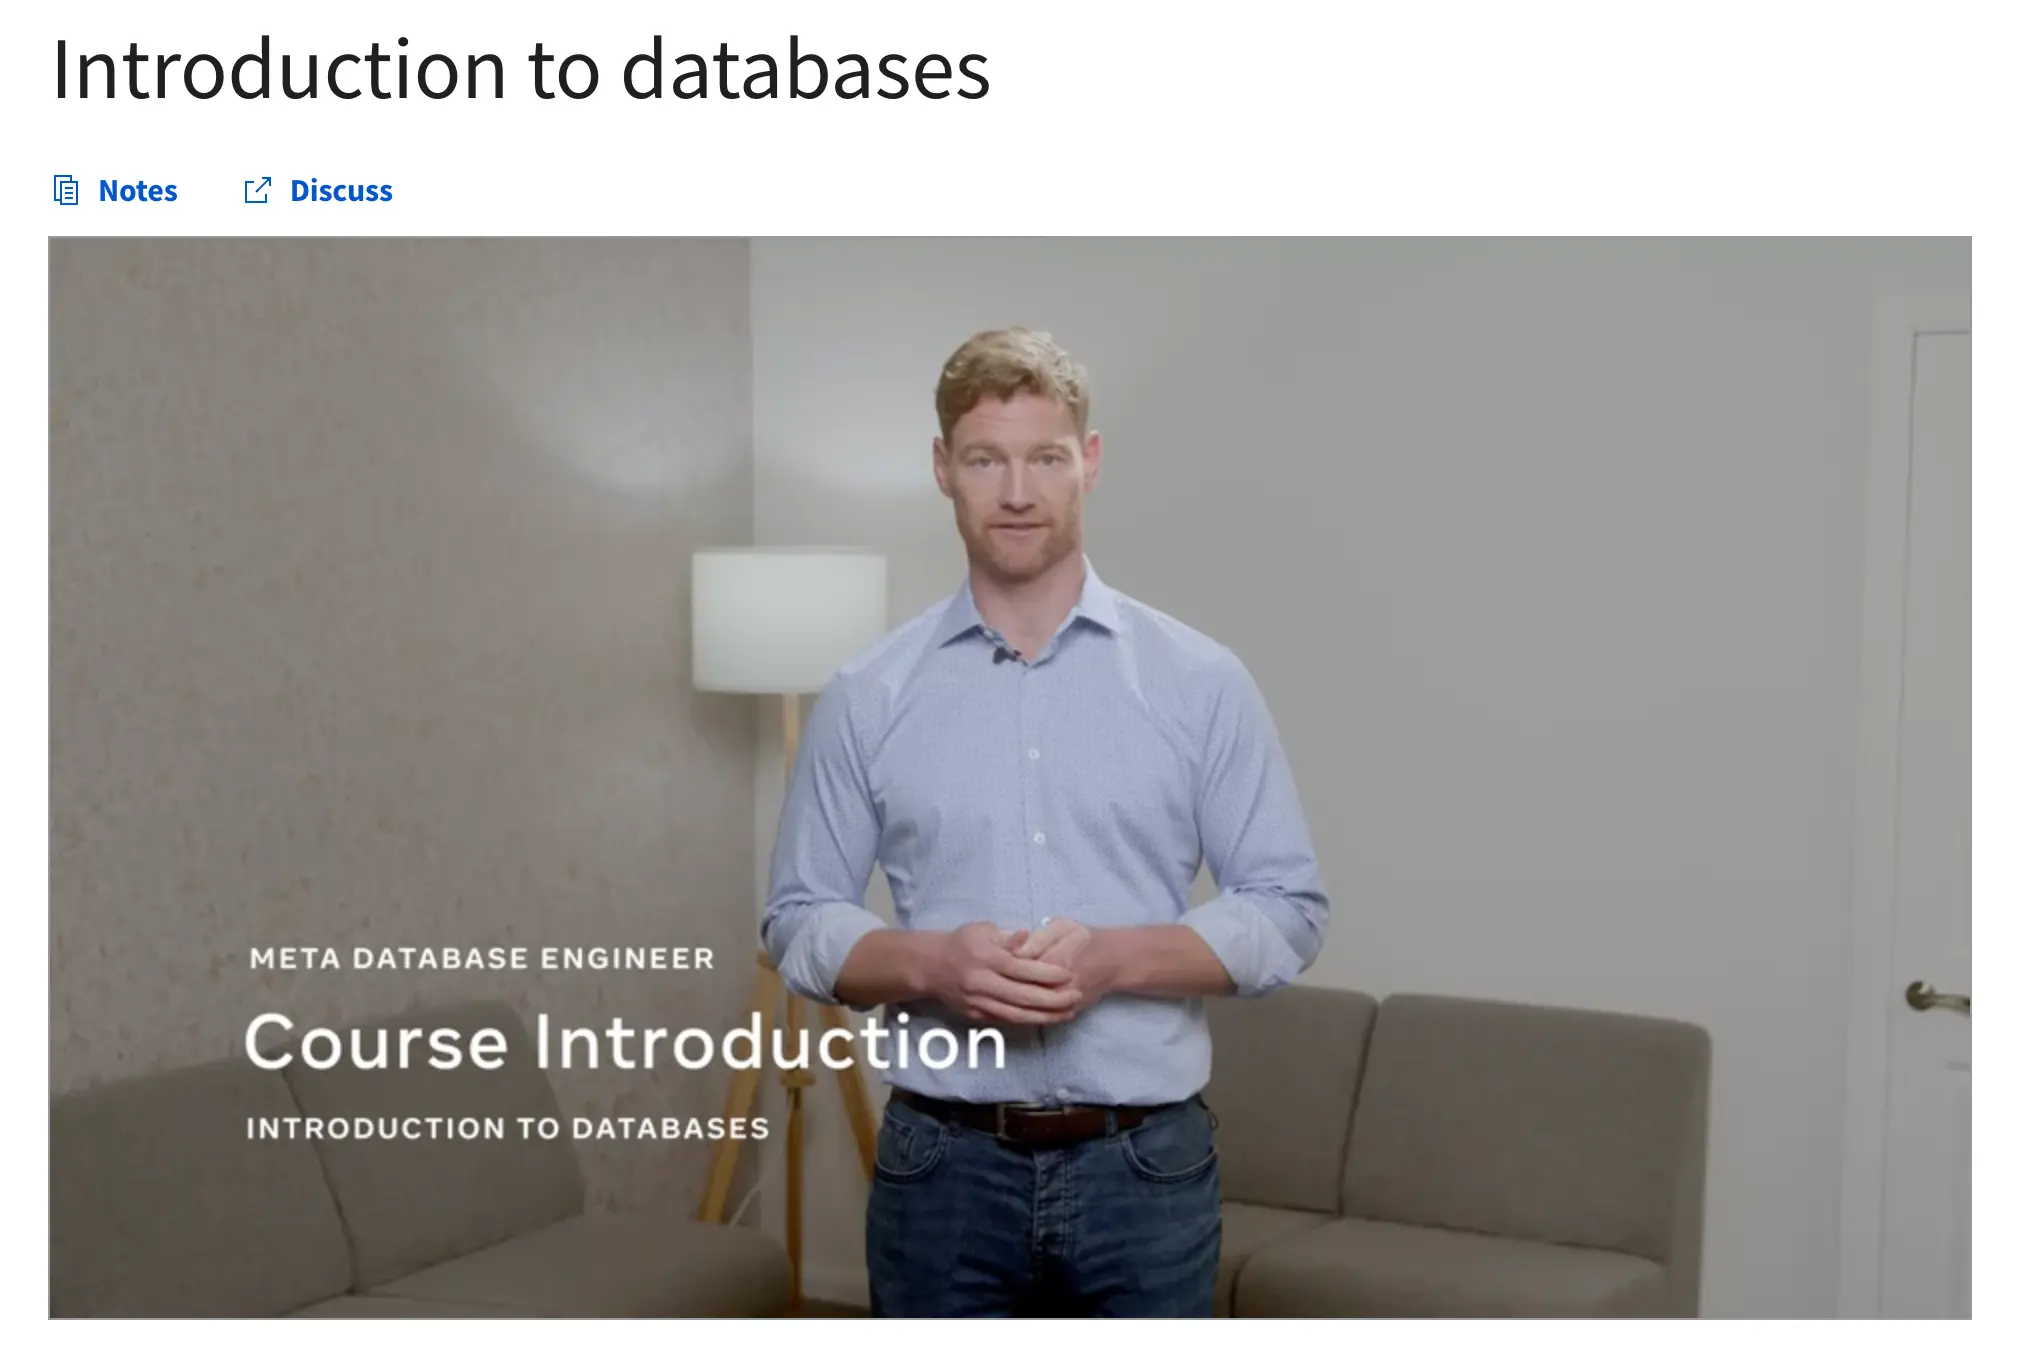 Introduction to Databases Course